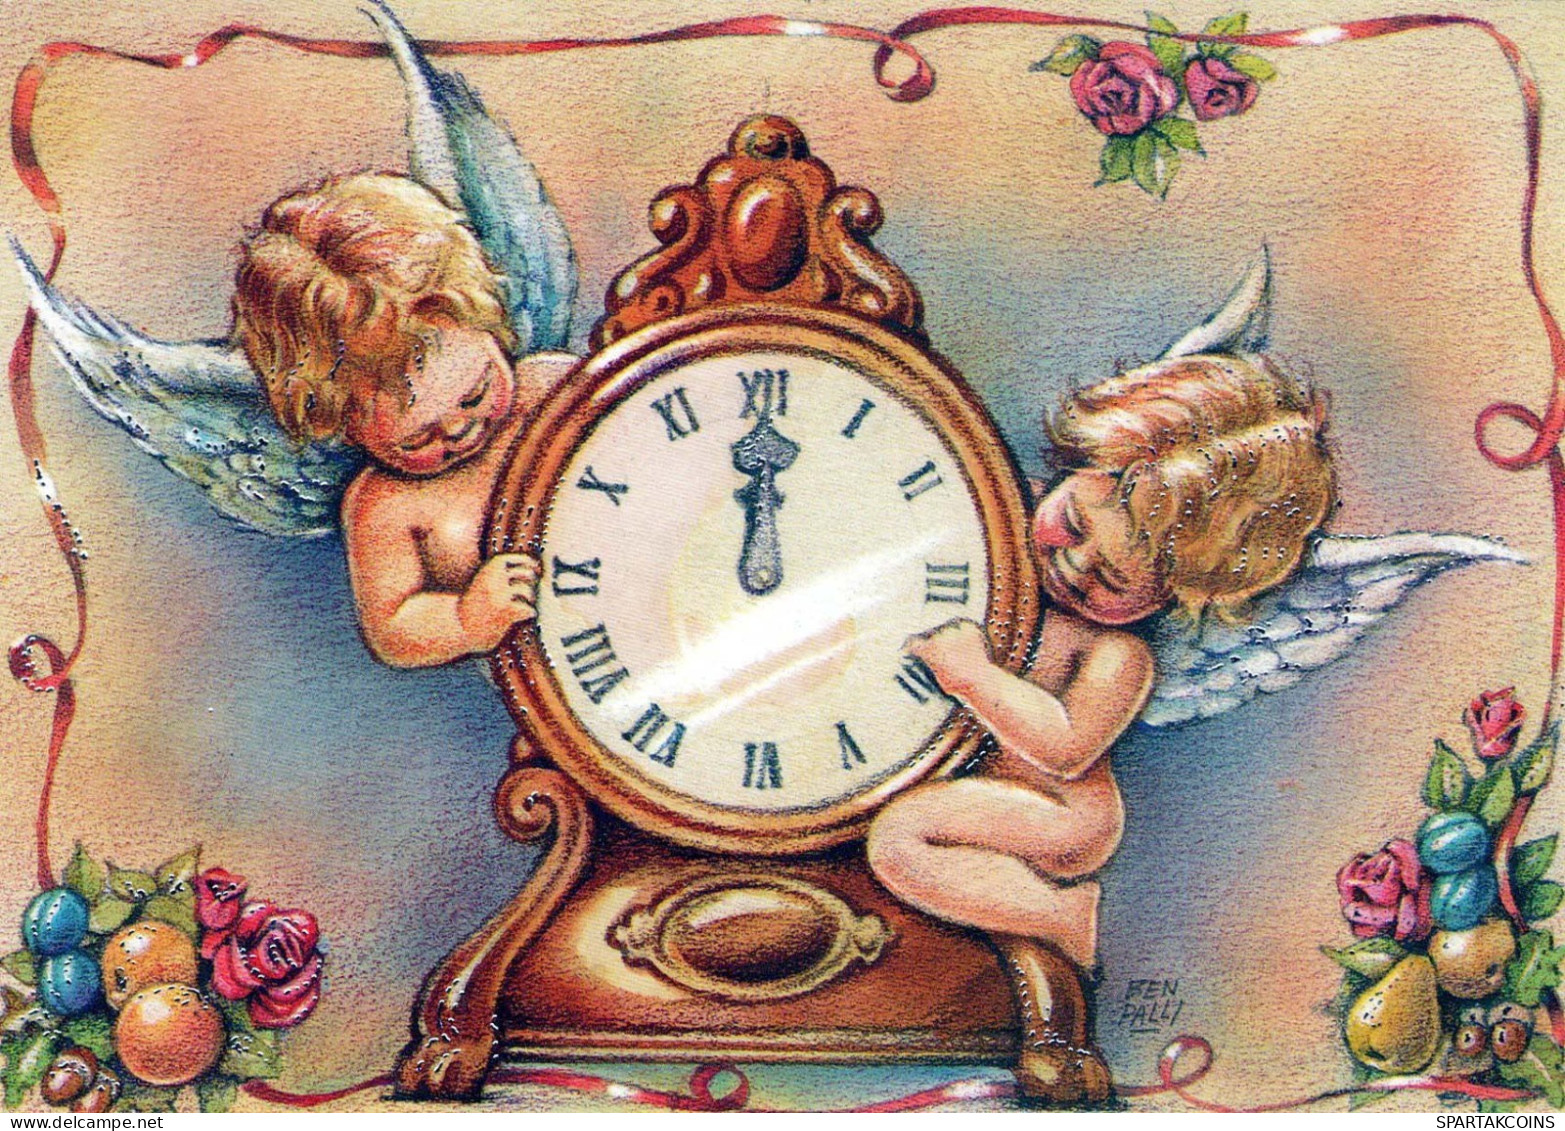 ANGEL Happy New Year Christmas TABLE CLOCK Vintage Postcard CPSM #PAT870.A - Engel